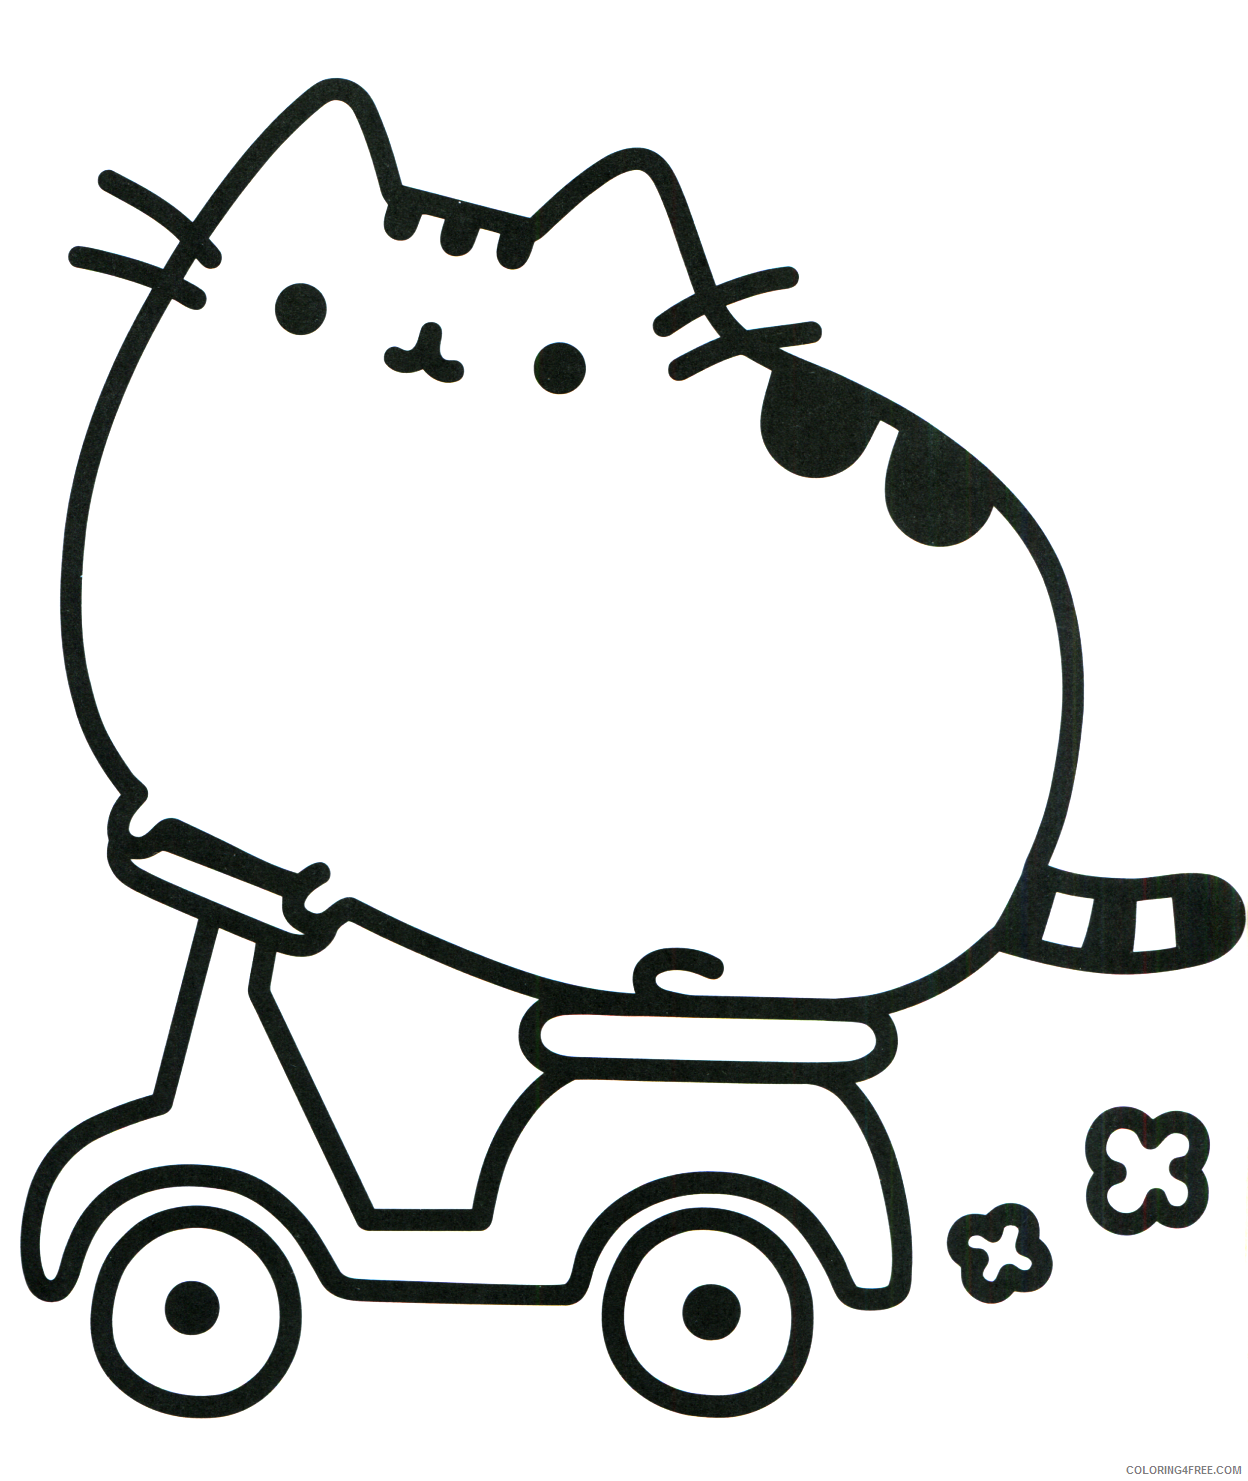 Pusheen Coloring Pages Cartoons 1528171524_pusheen cat on a motorbike Printable 2020 5160 Coloring4free